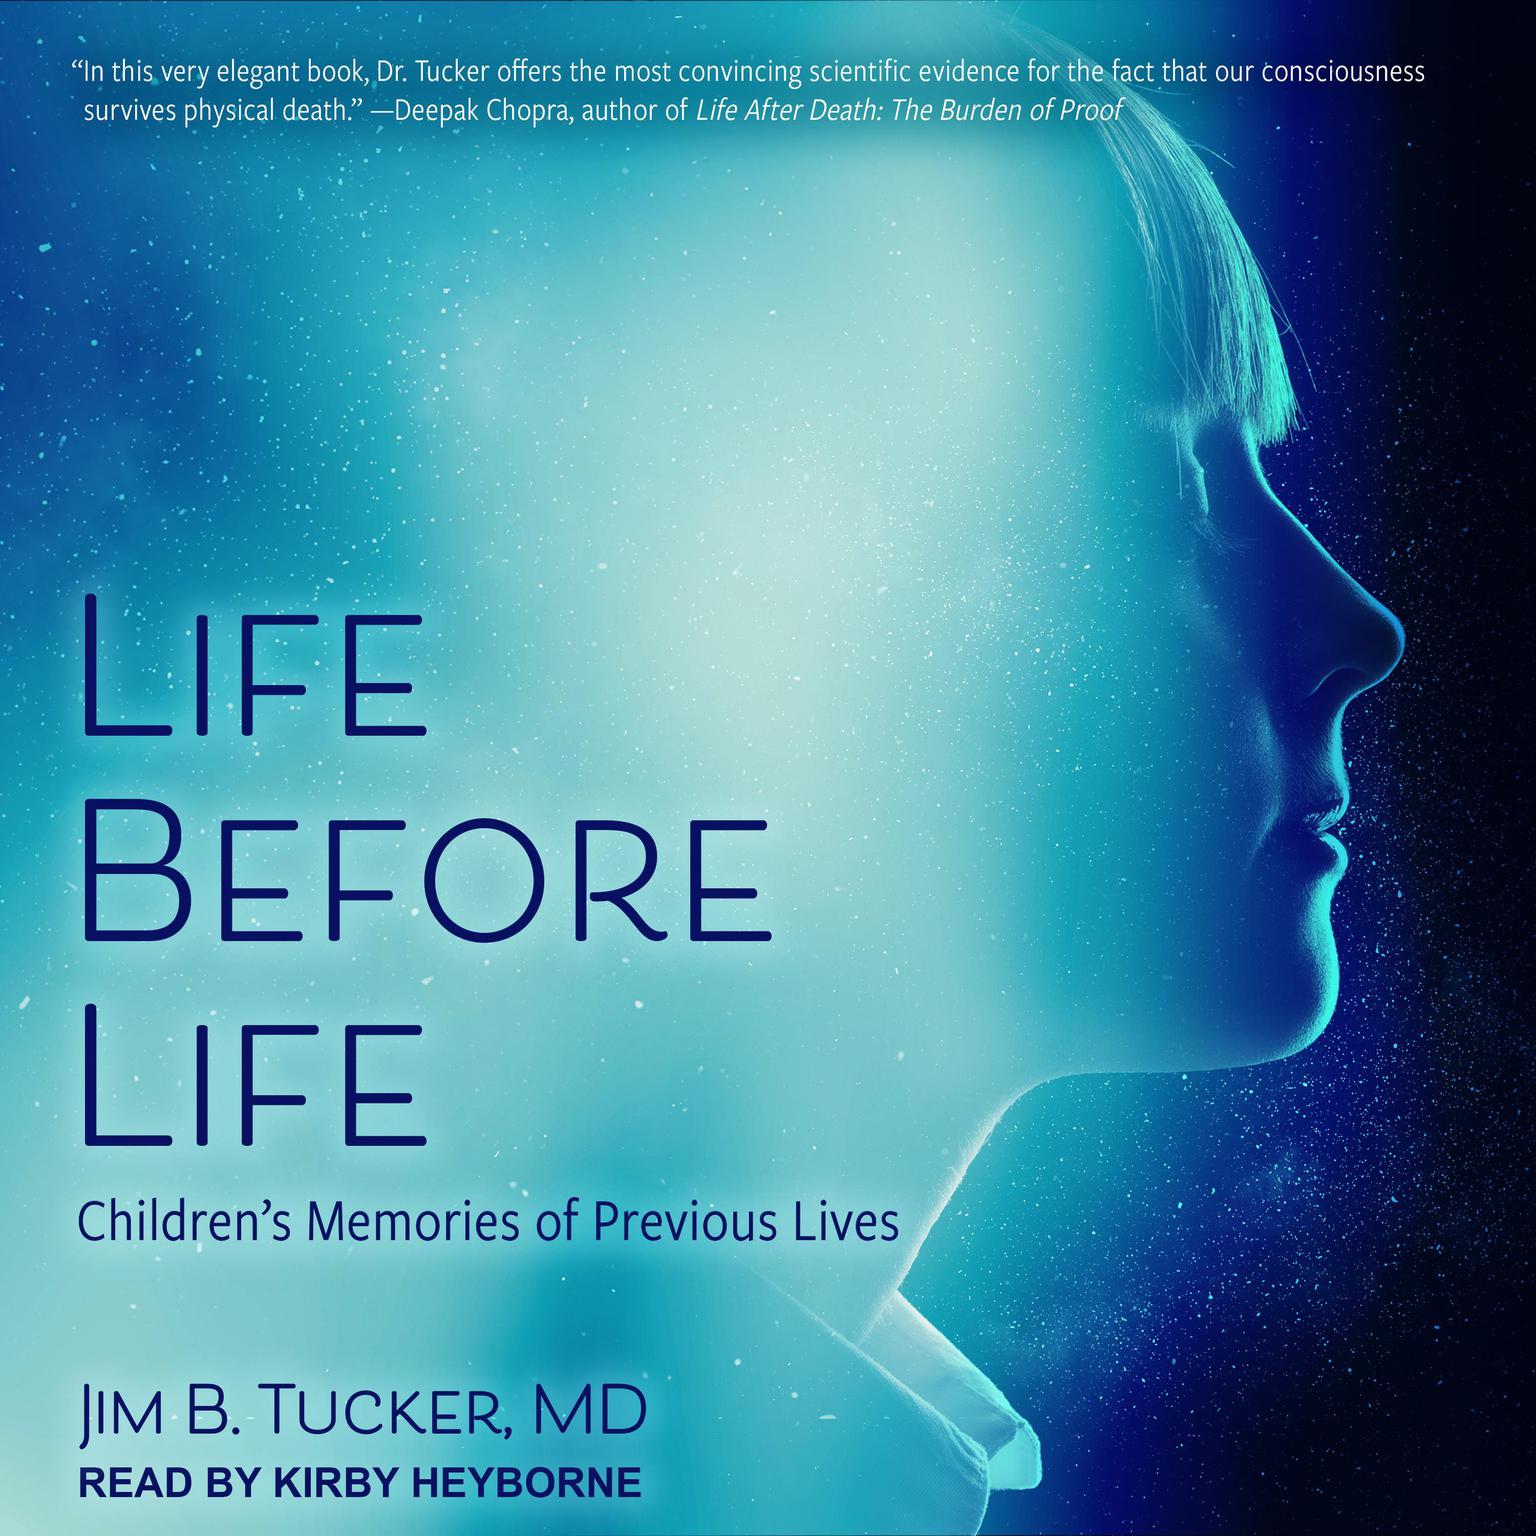 Life Before Life: Childrens Memories of Previous Lives Audiobook, by Jim B. Tucker